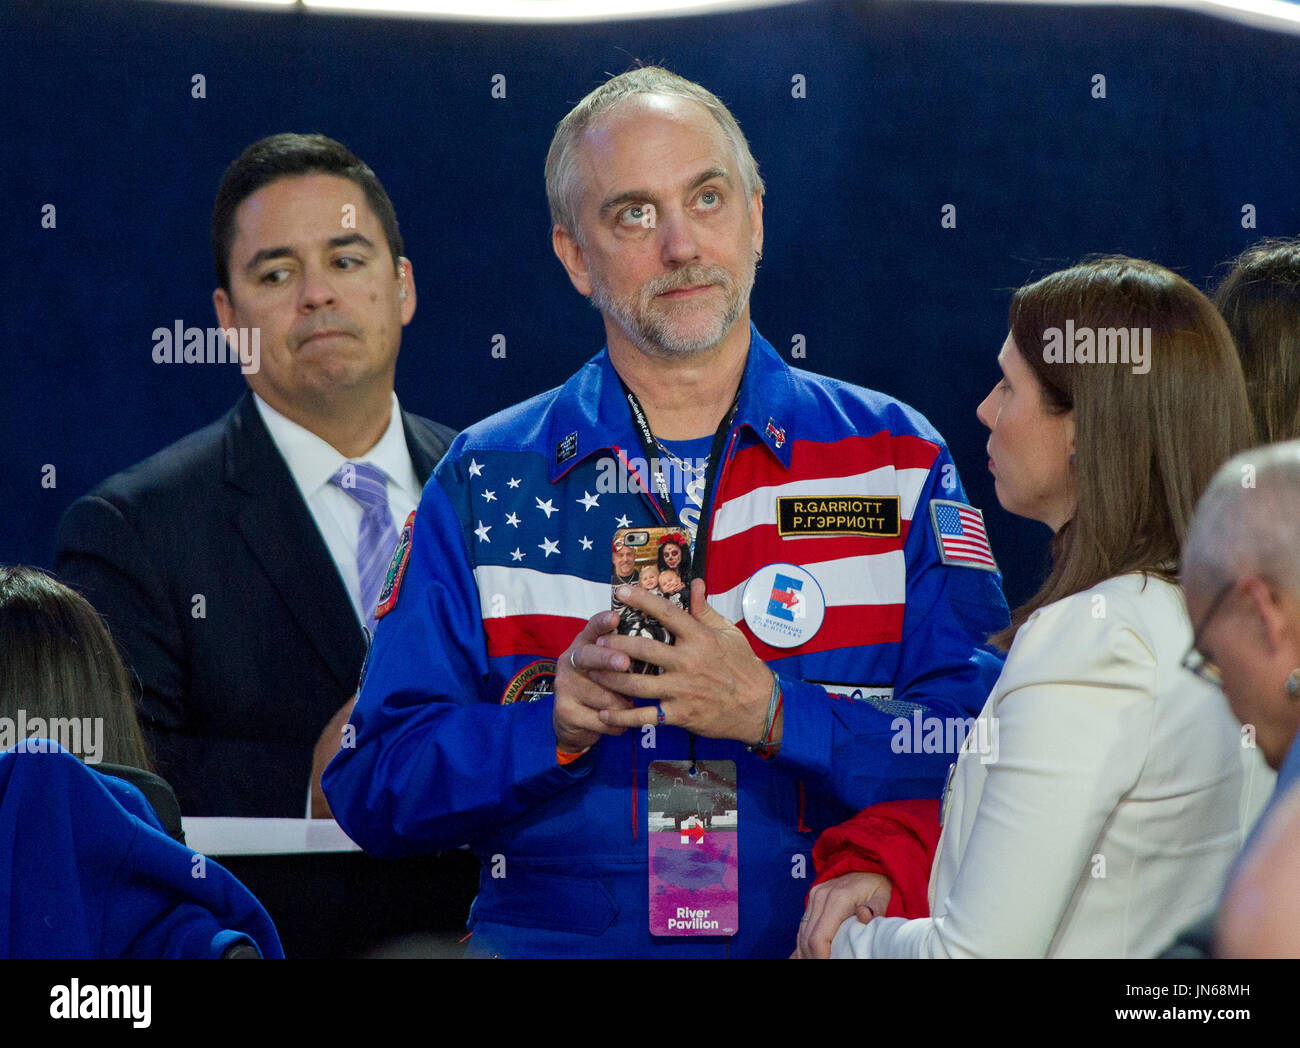 Richard Garriott, famed video game developer, attends the Hillary Clinton Election Night Event at the Jacob K. Javits Convention Center in New York, New York on Tuesday, November 8, 2016. Credit: Ron Sachs / CNP Stock Photo